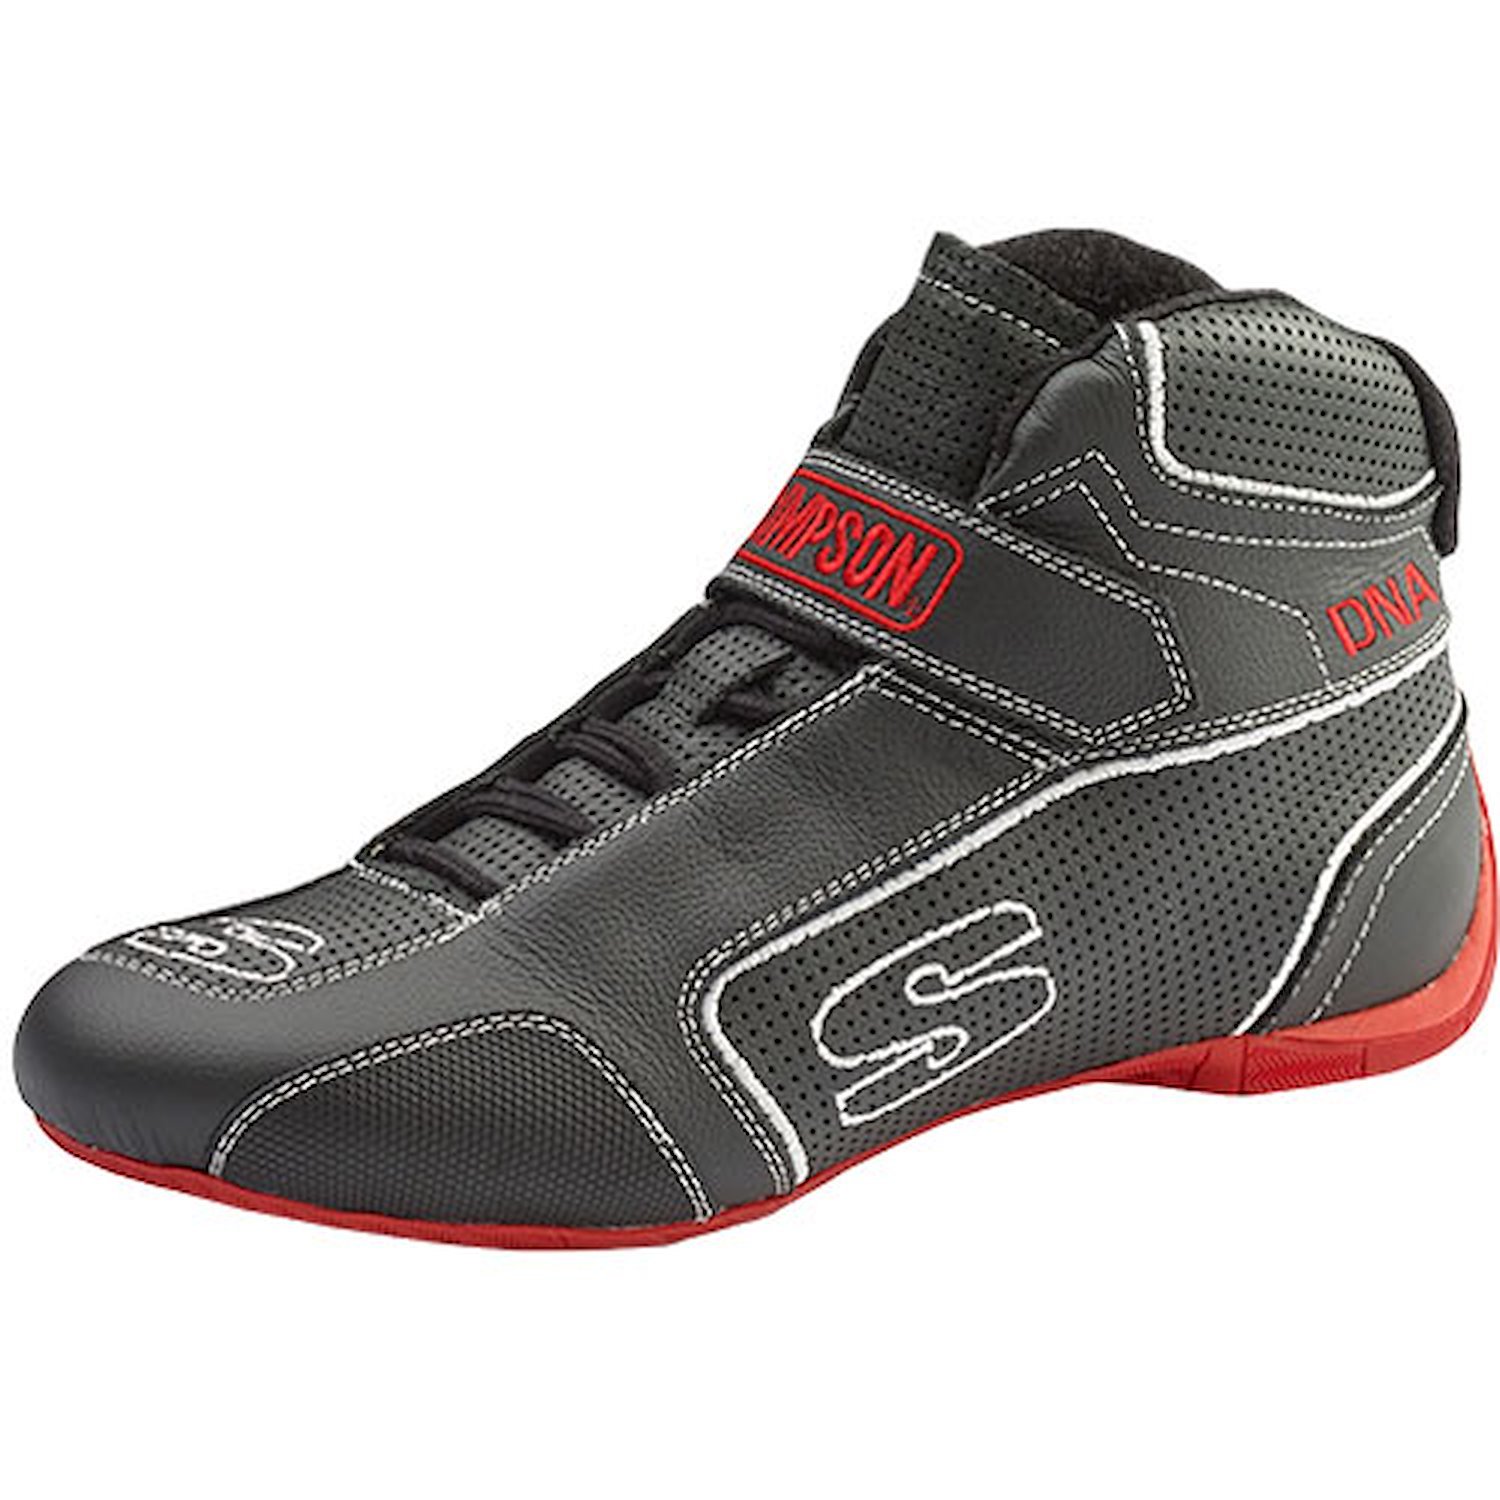 SFI 3.3/5 DNA Racing Shoes Size: 12.5